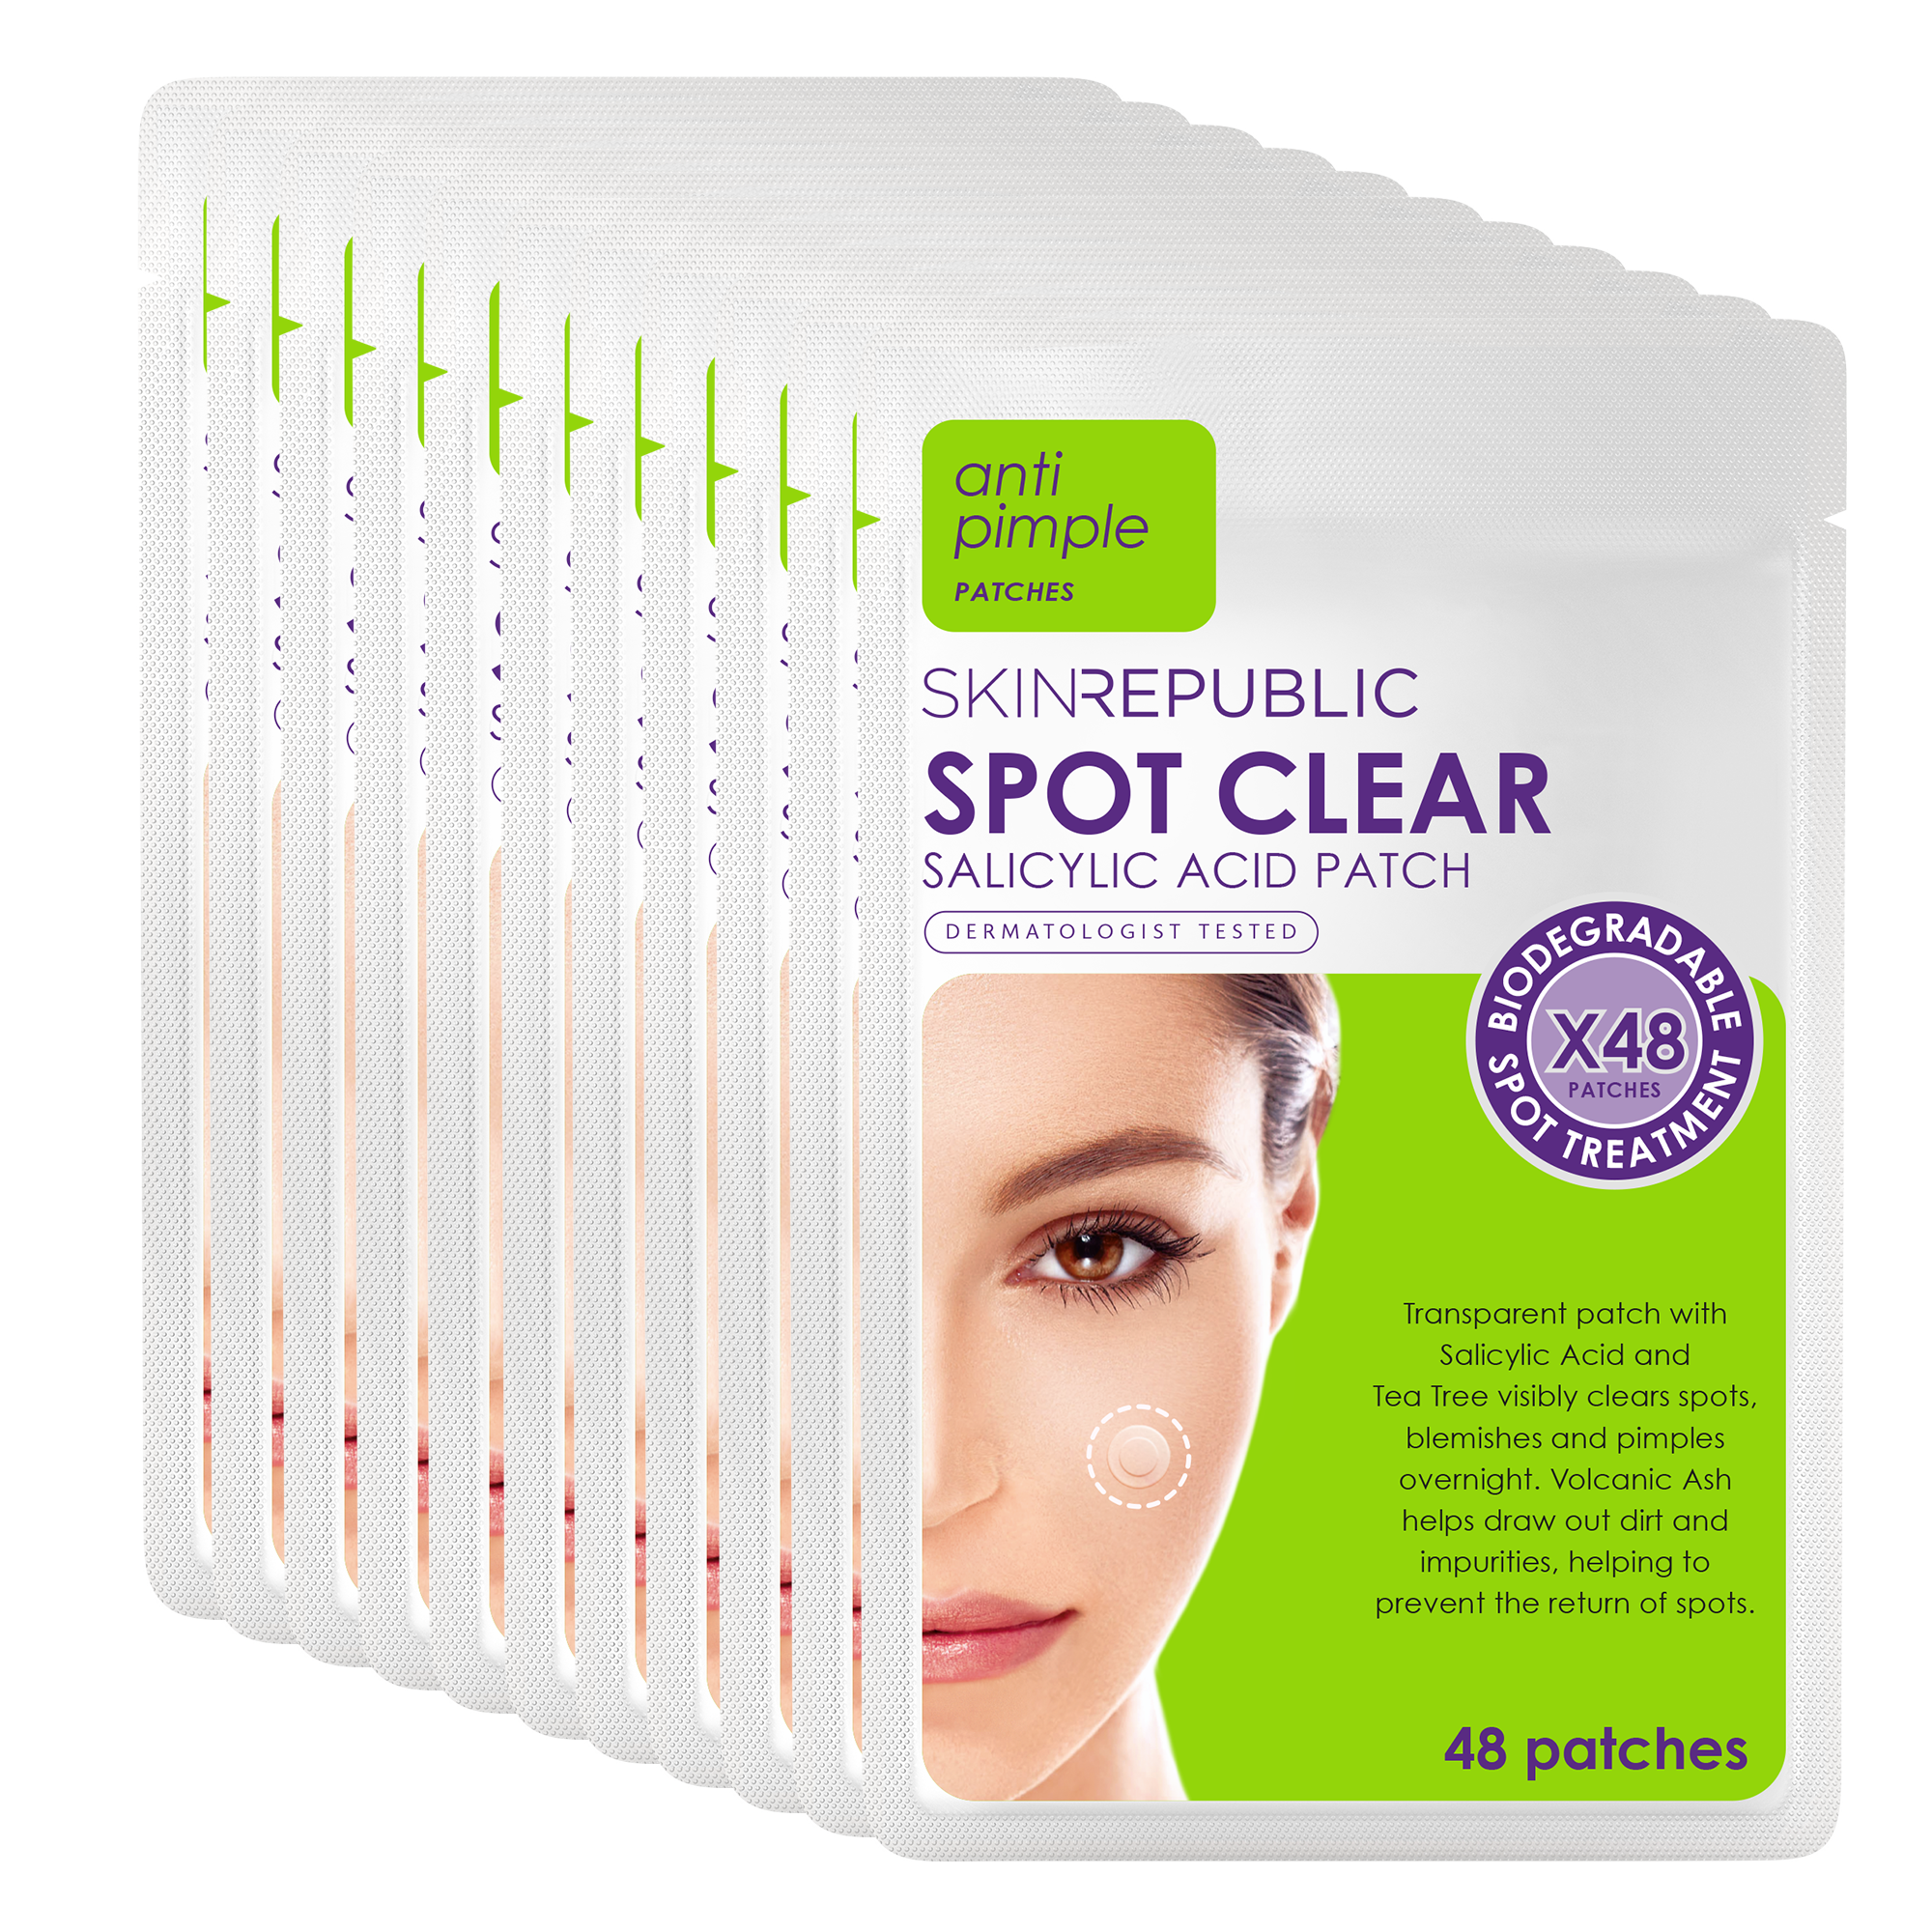 Pack of 10 - Spot Clear Pimple Patch with Salicylic Acid (48 Patches)